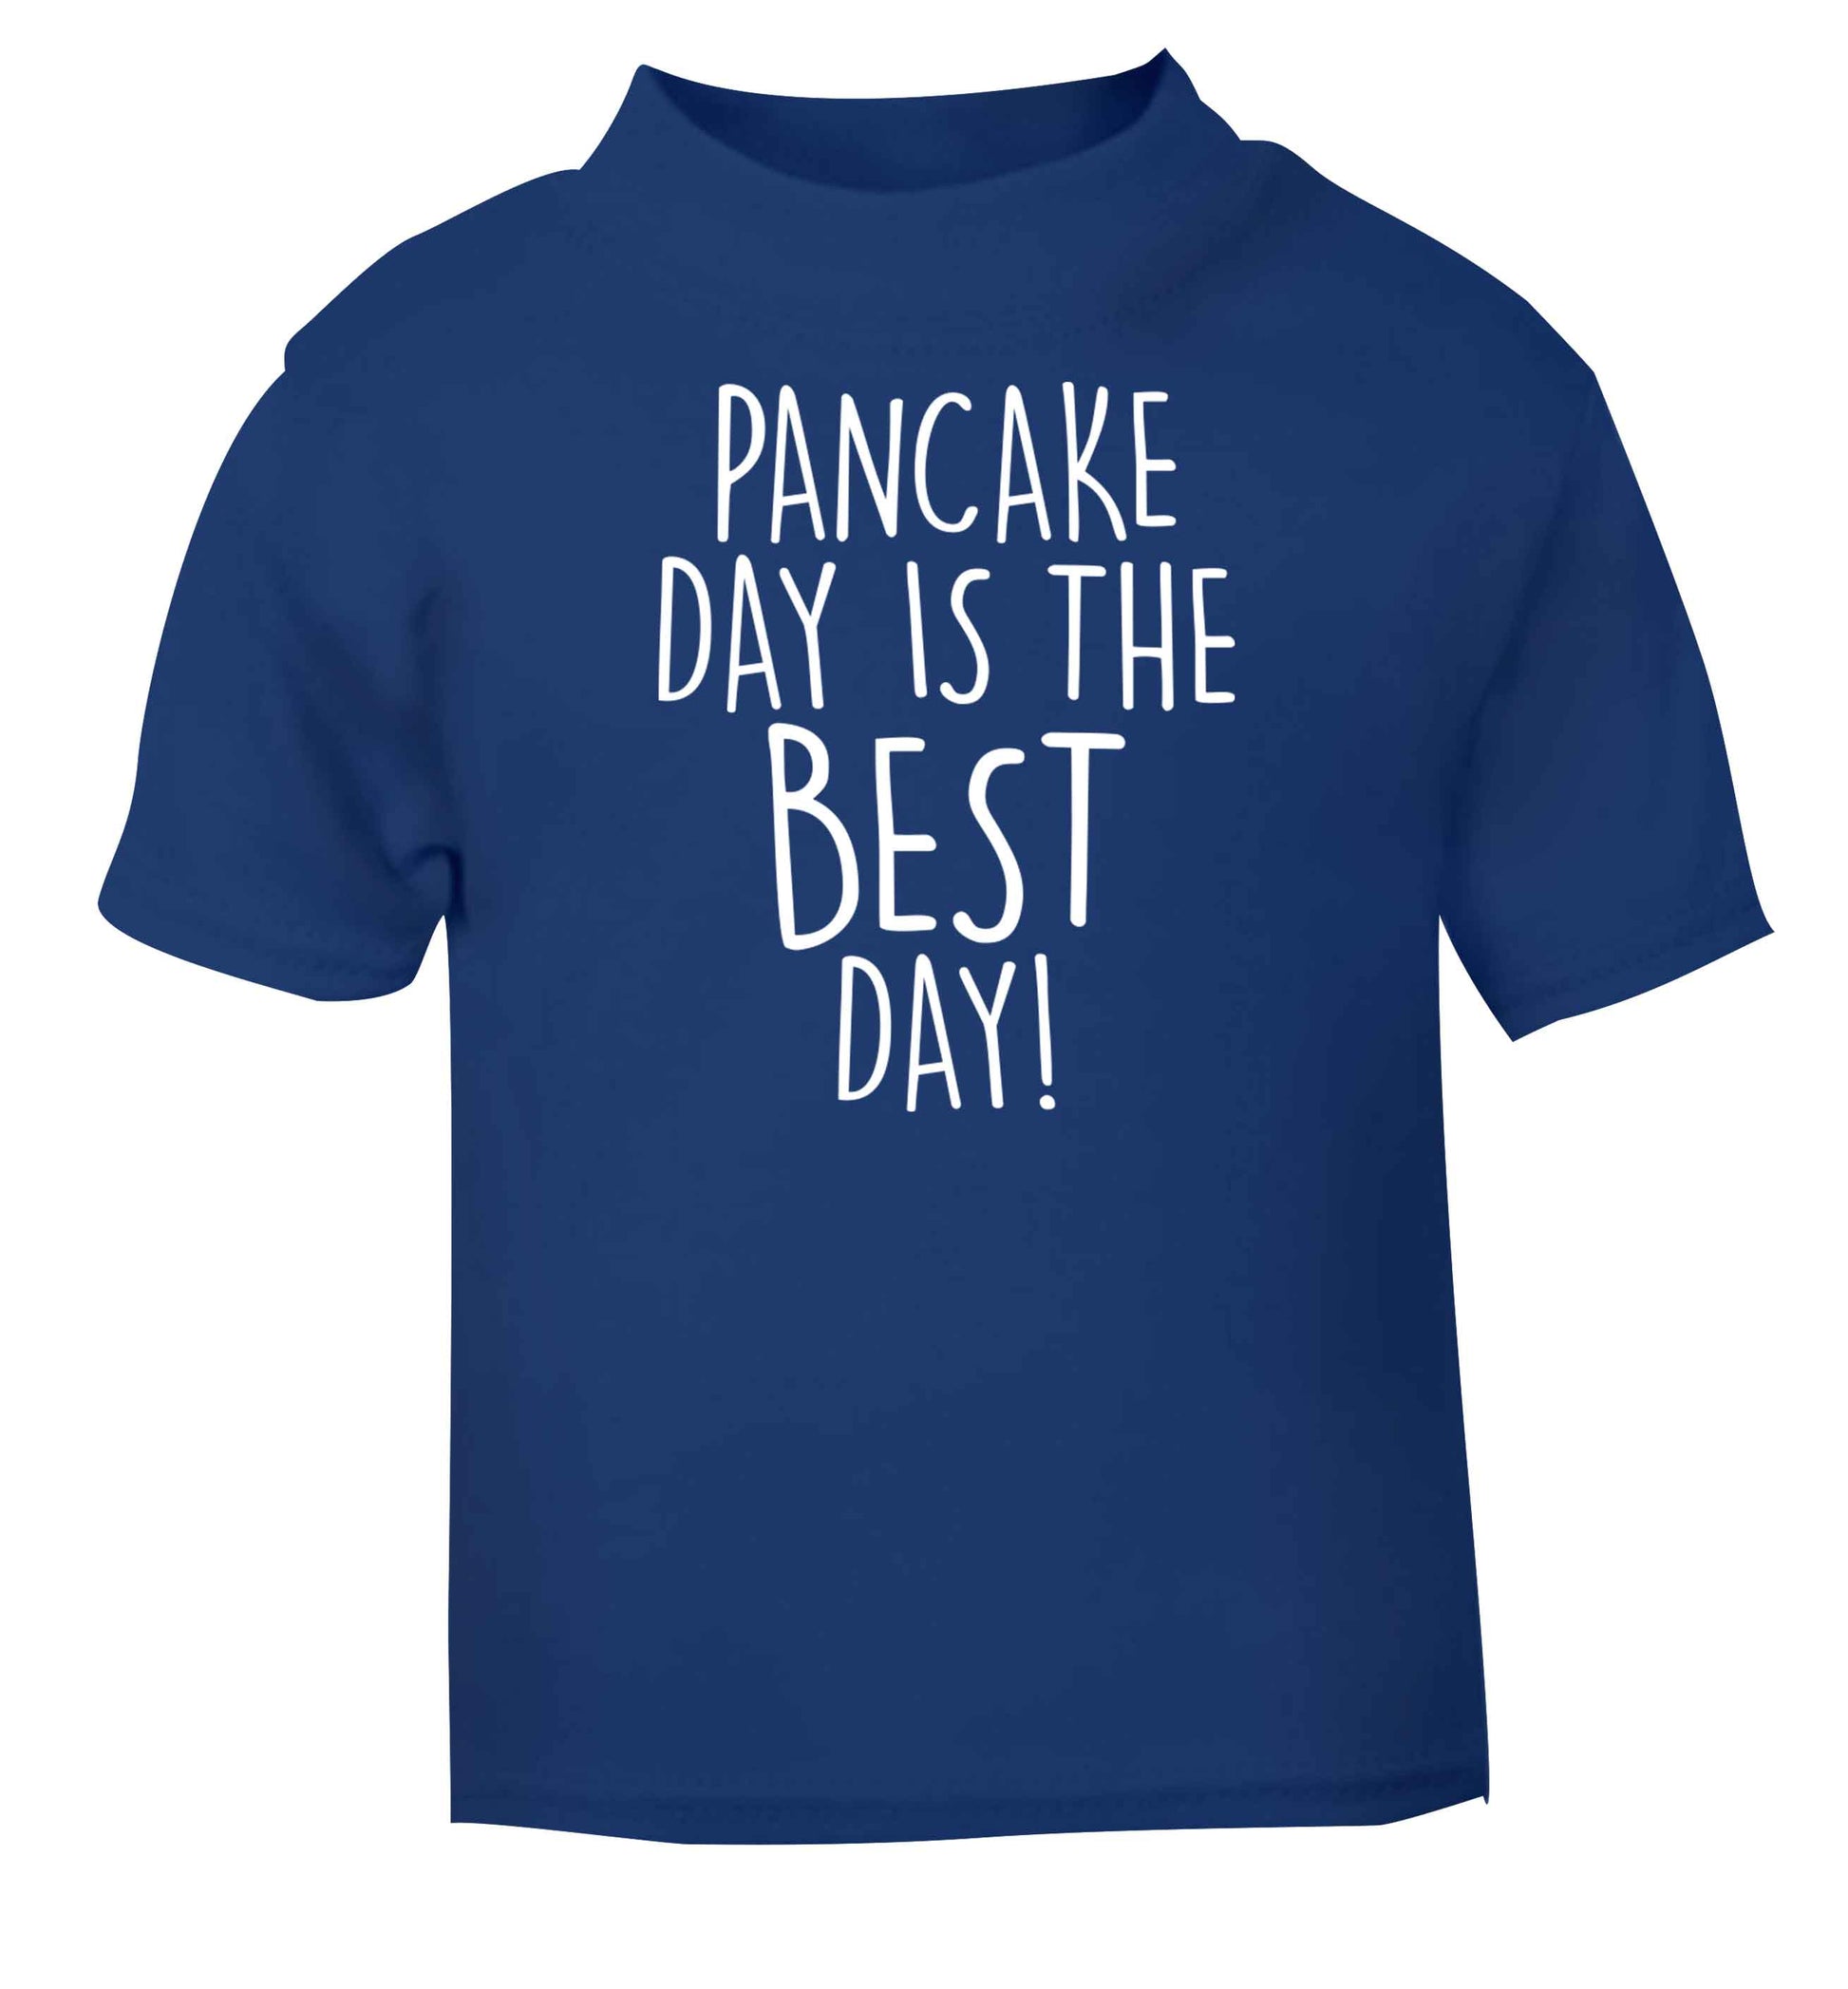 Pancake day is the best day blue baby toddler Tshirt 2 Years